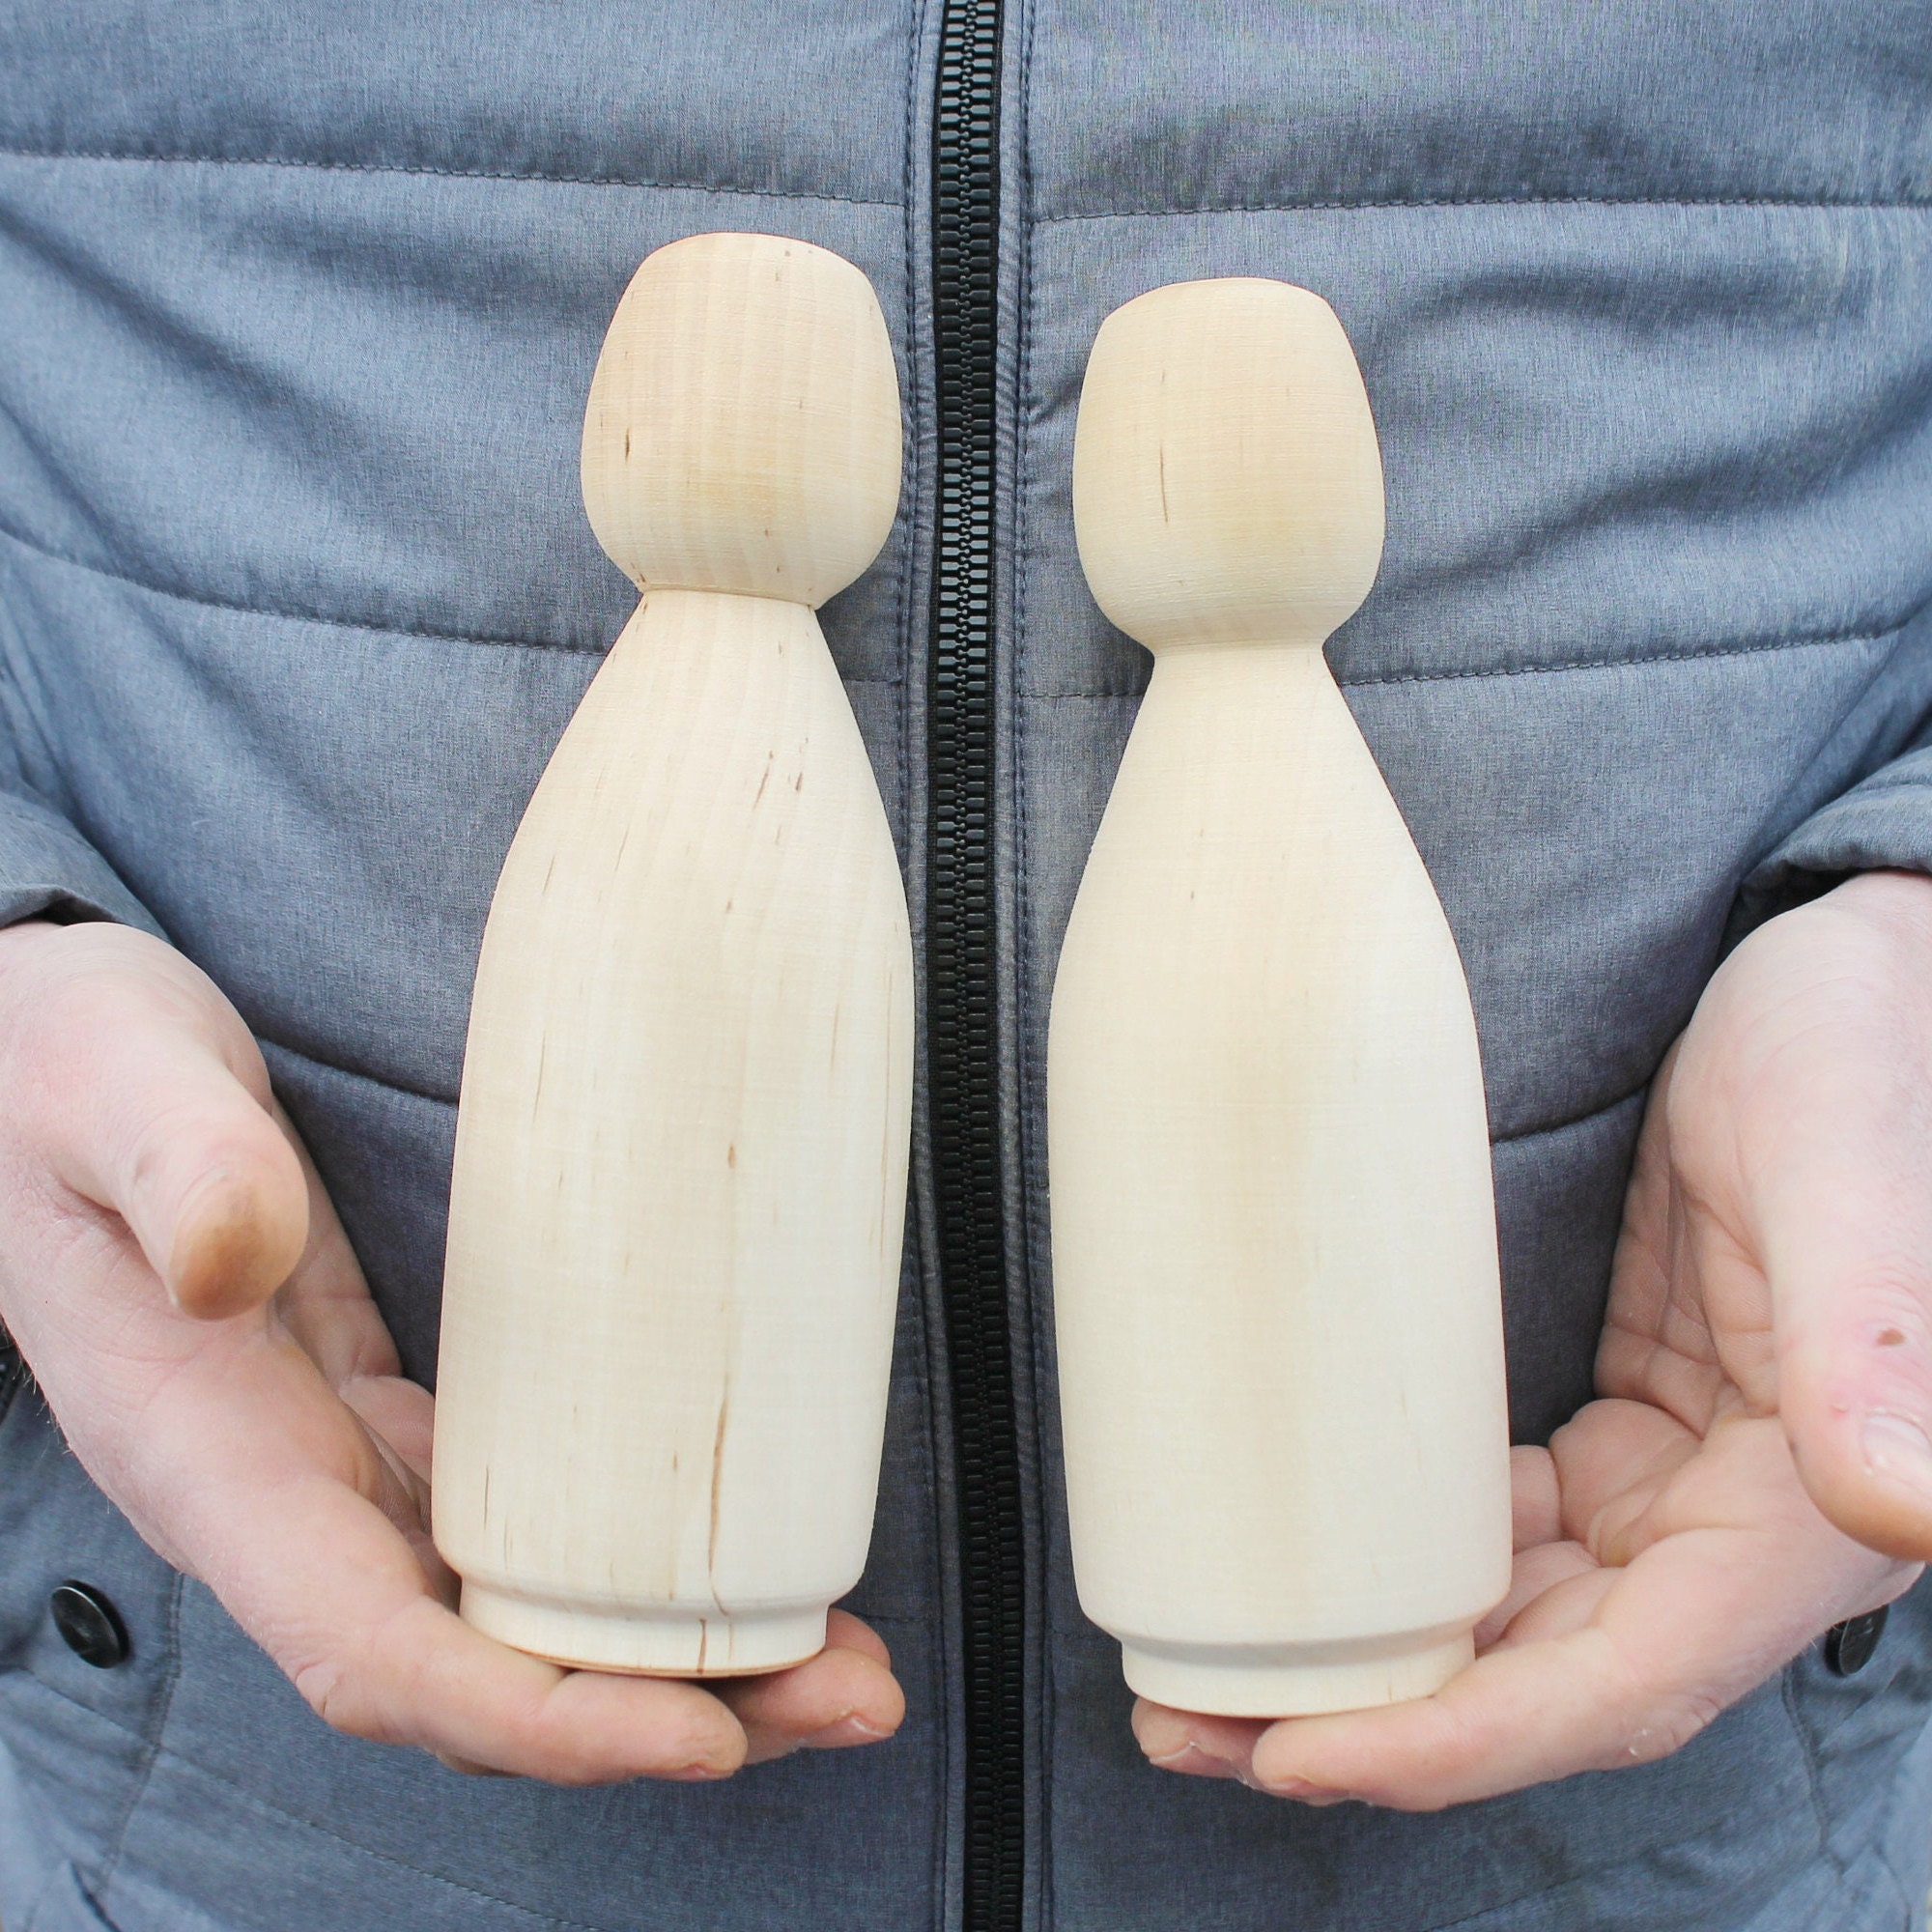 Large Peg Dolls Unfinished, Plain Wooden Pegs to Paint, Natural